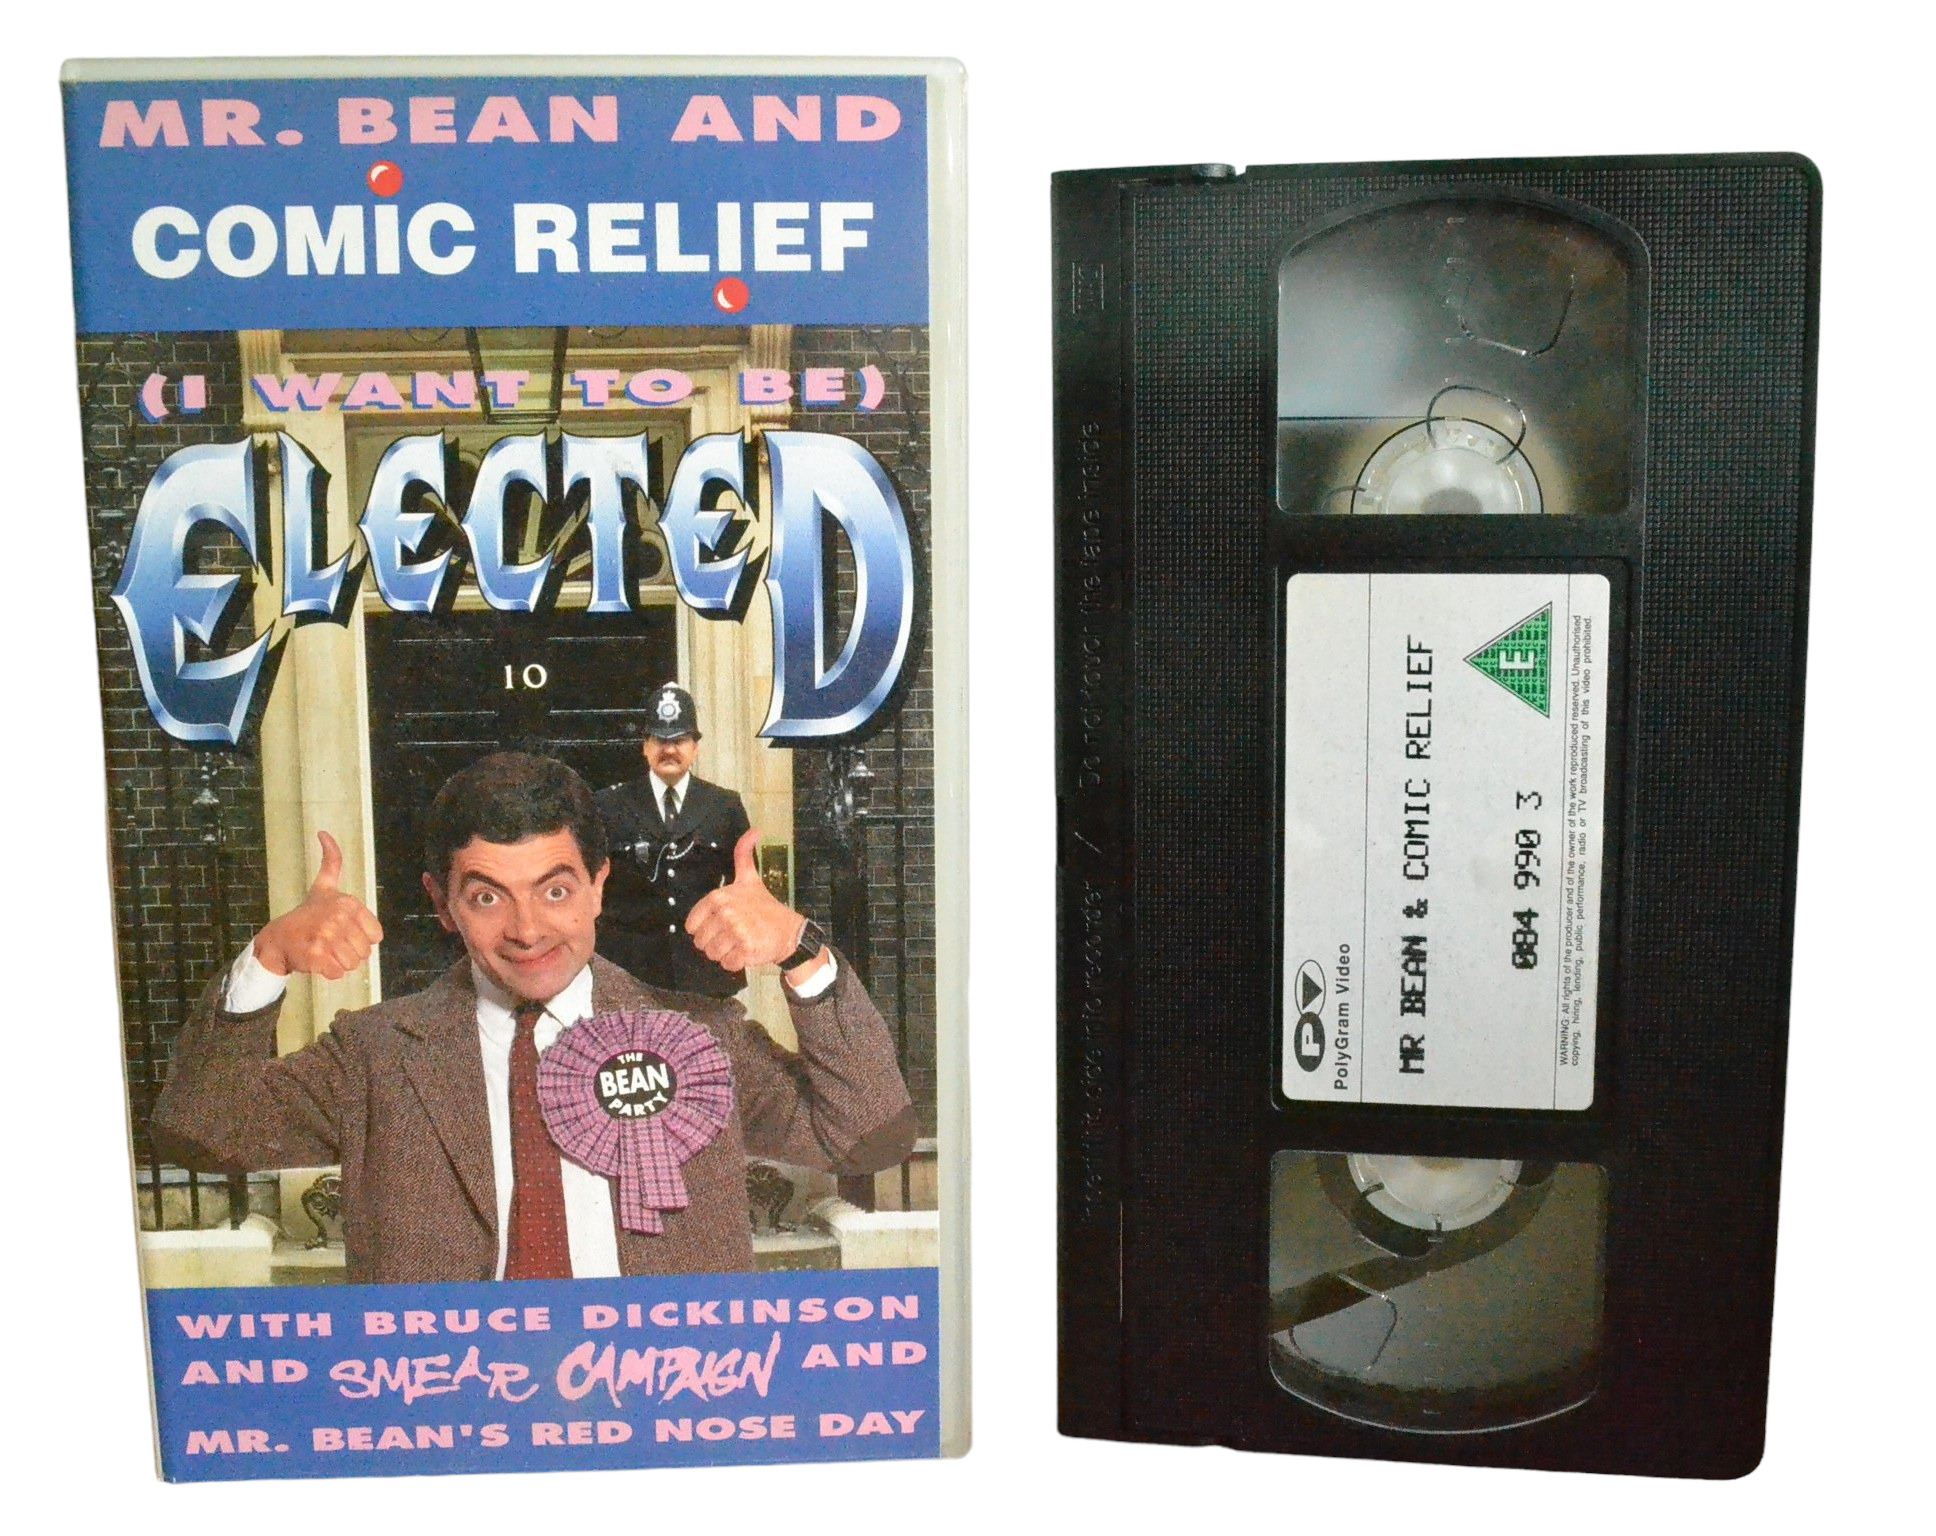 Mr. Bean and Comic Relief : (I Want to Be) Elected - Rowan Atkinson - PolyGram Video - 0849903 - Comedy - Pal - VHS-